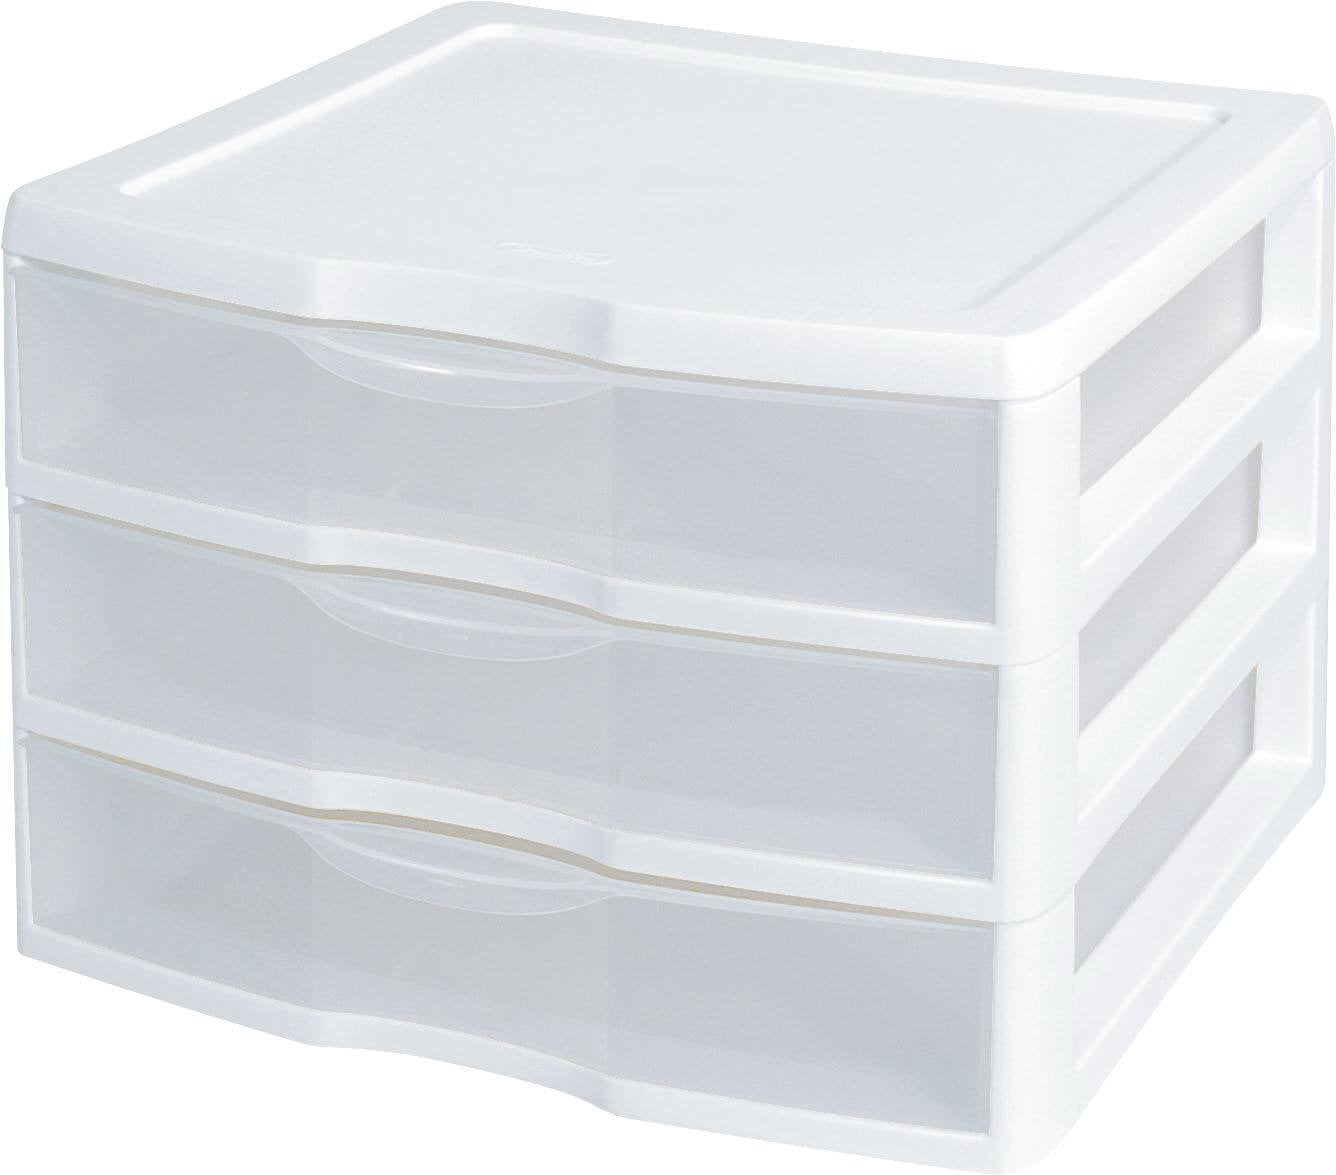 Black Frame with Clear Drawers and Cover Sterilite 20639004 3 Drawer Desktop Unit 4-Pack Sterilite-Massillon OH